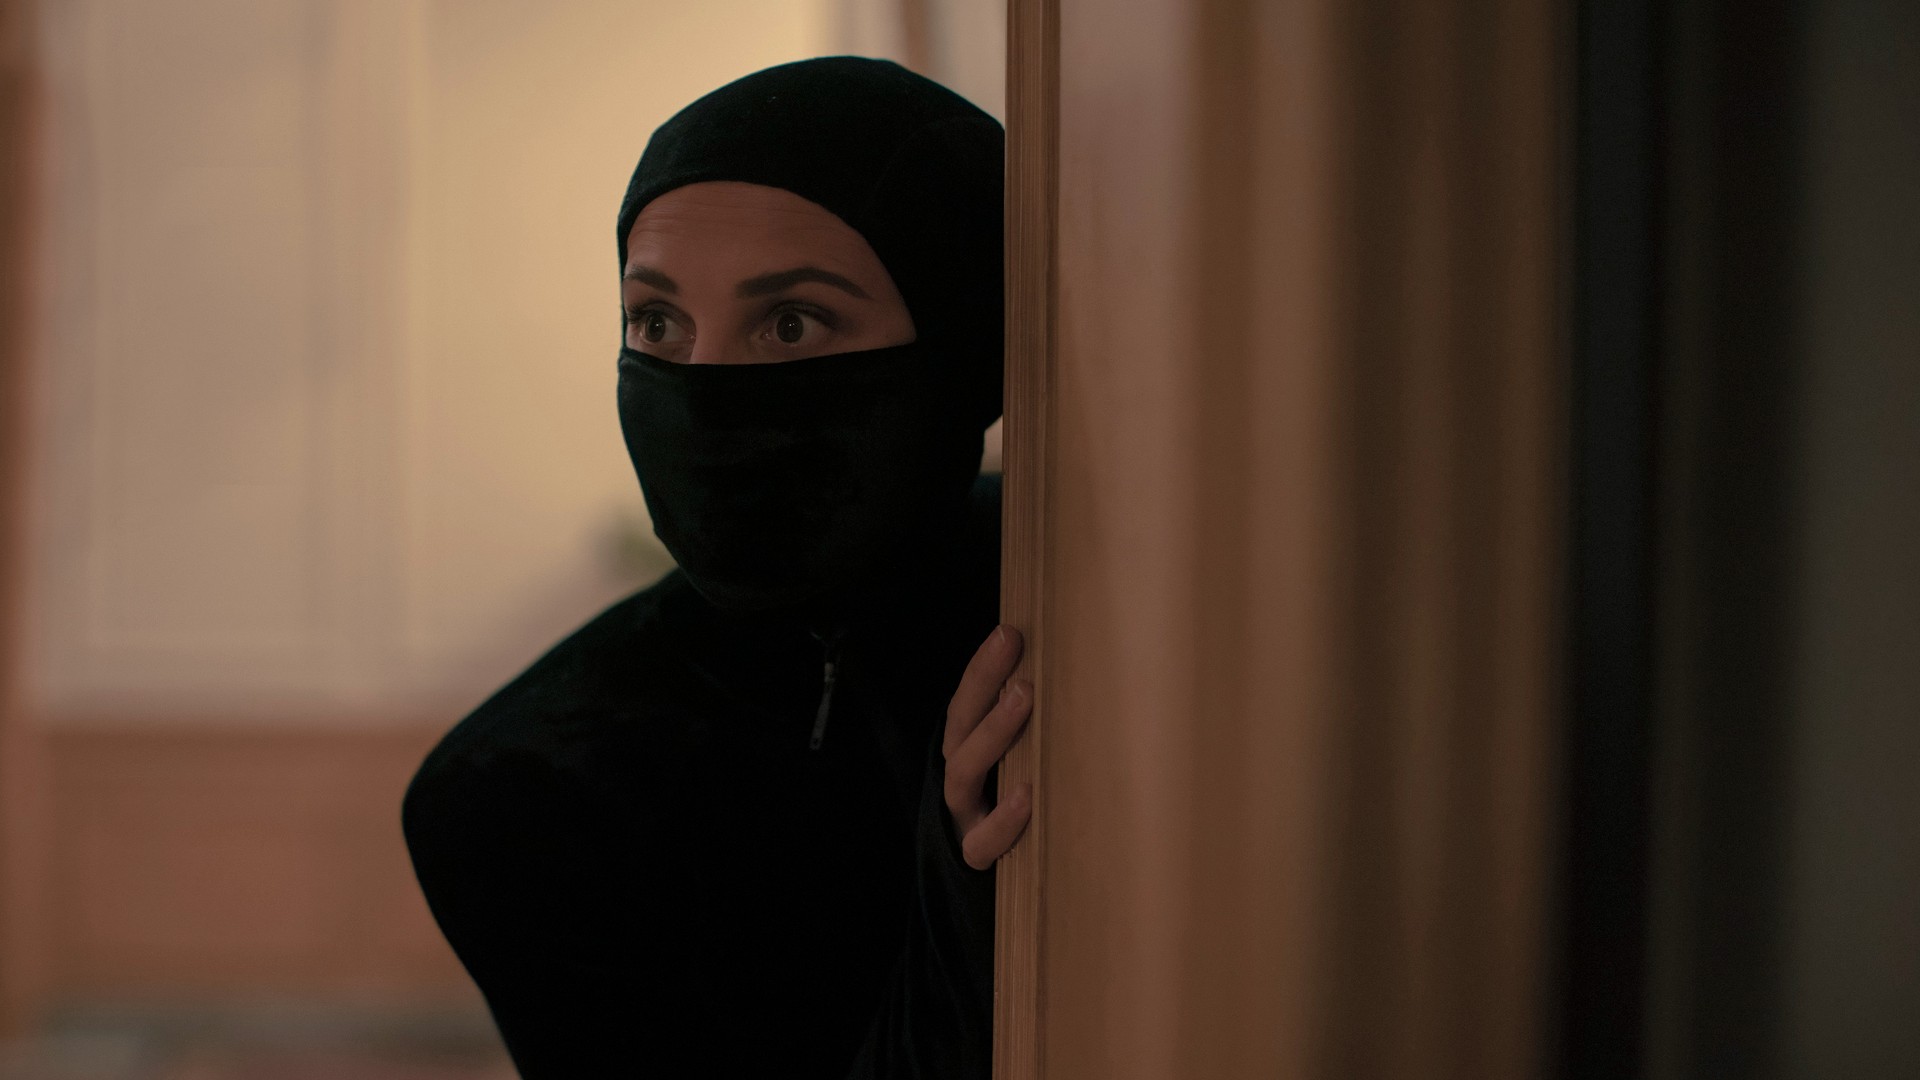 Irma Vep Trailer Reveals First Look At Alicia Vikander's New HBO Show